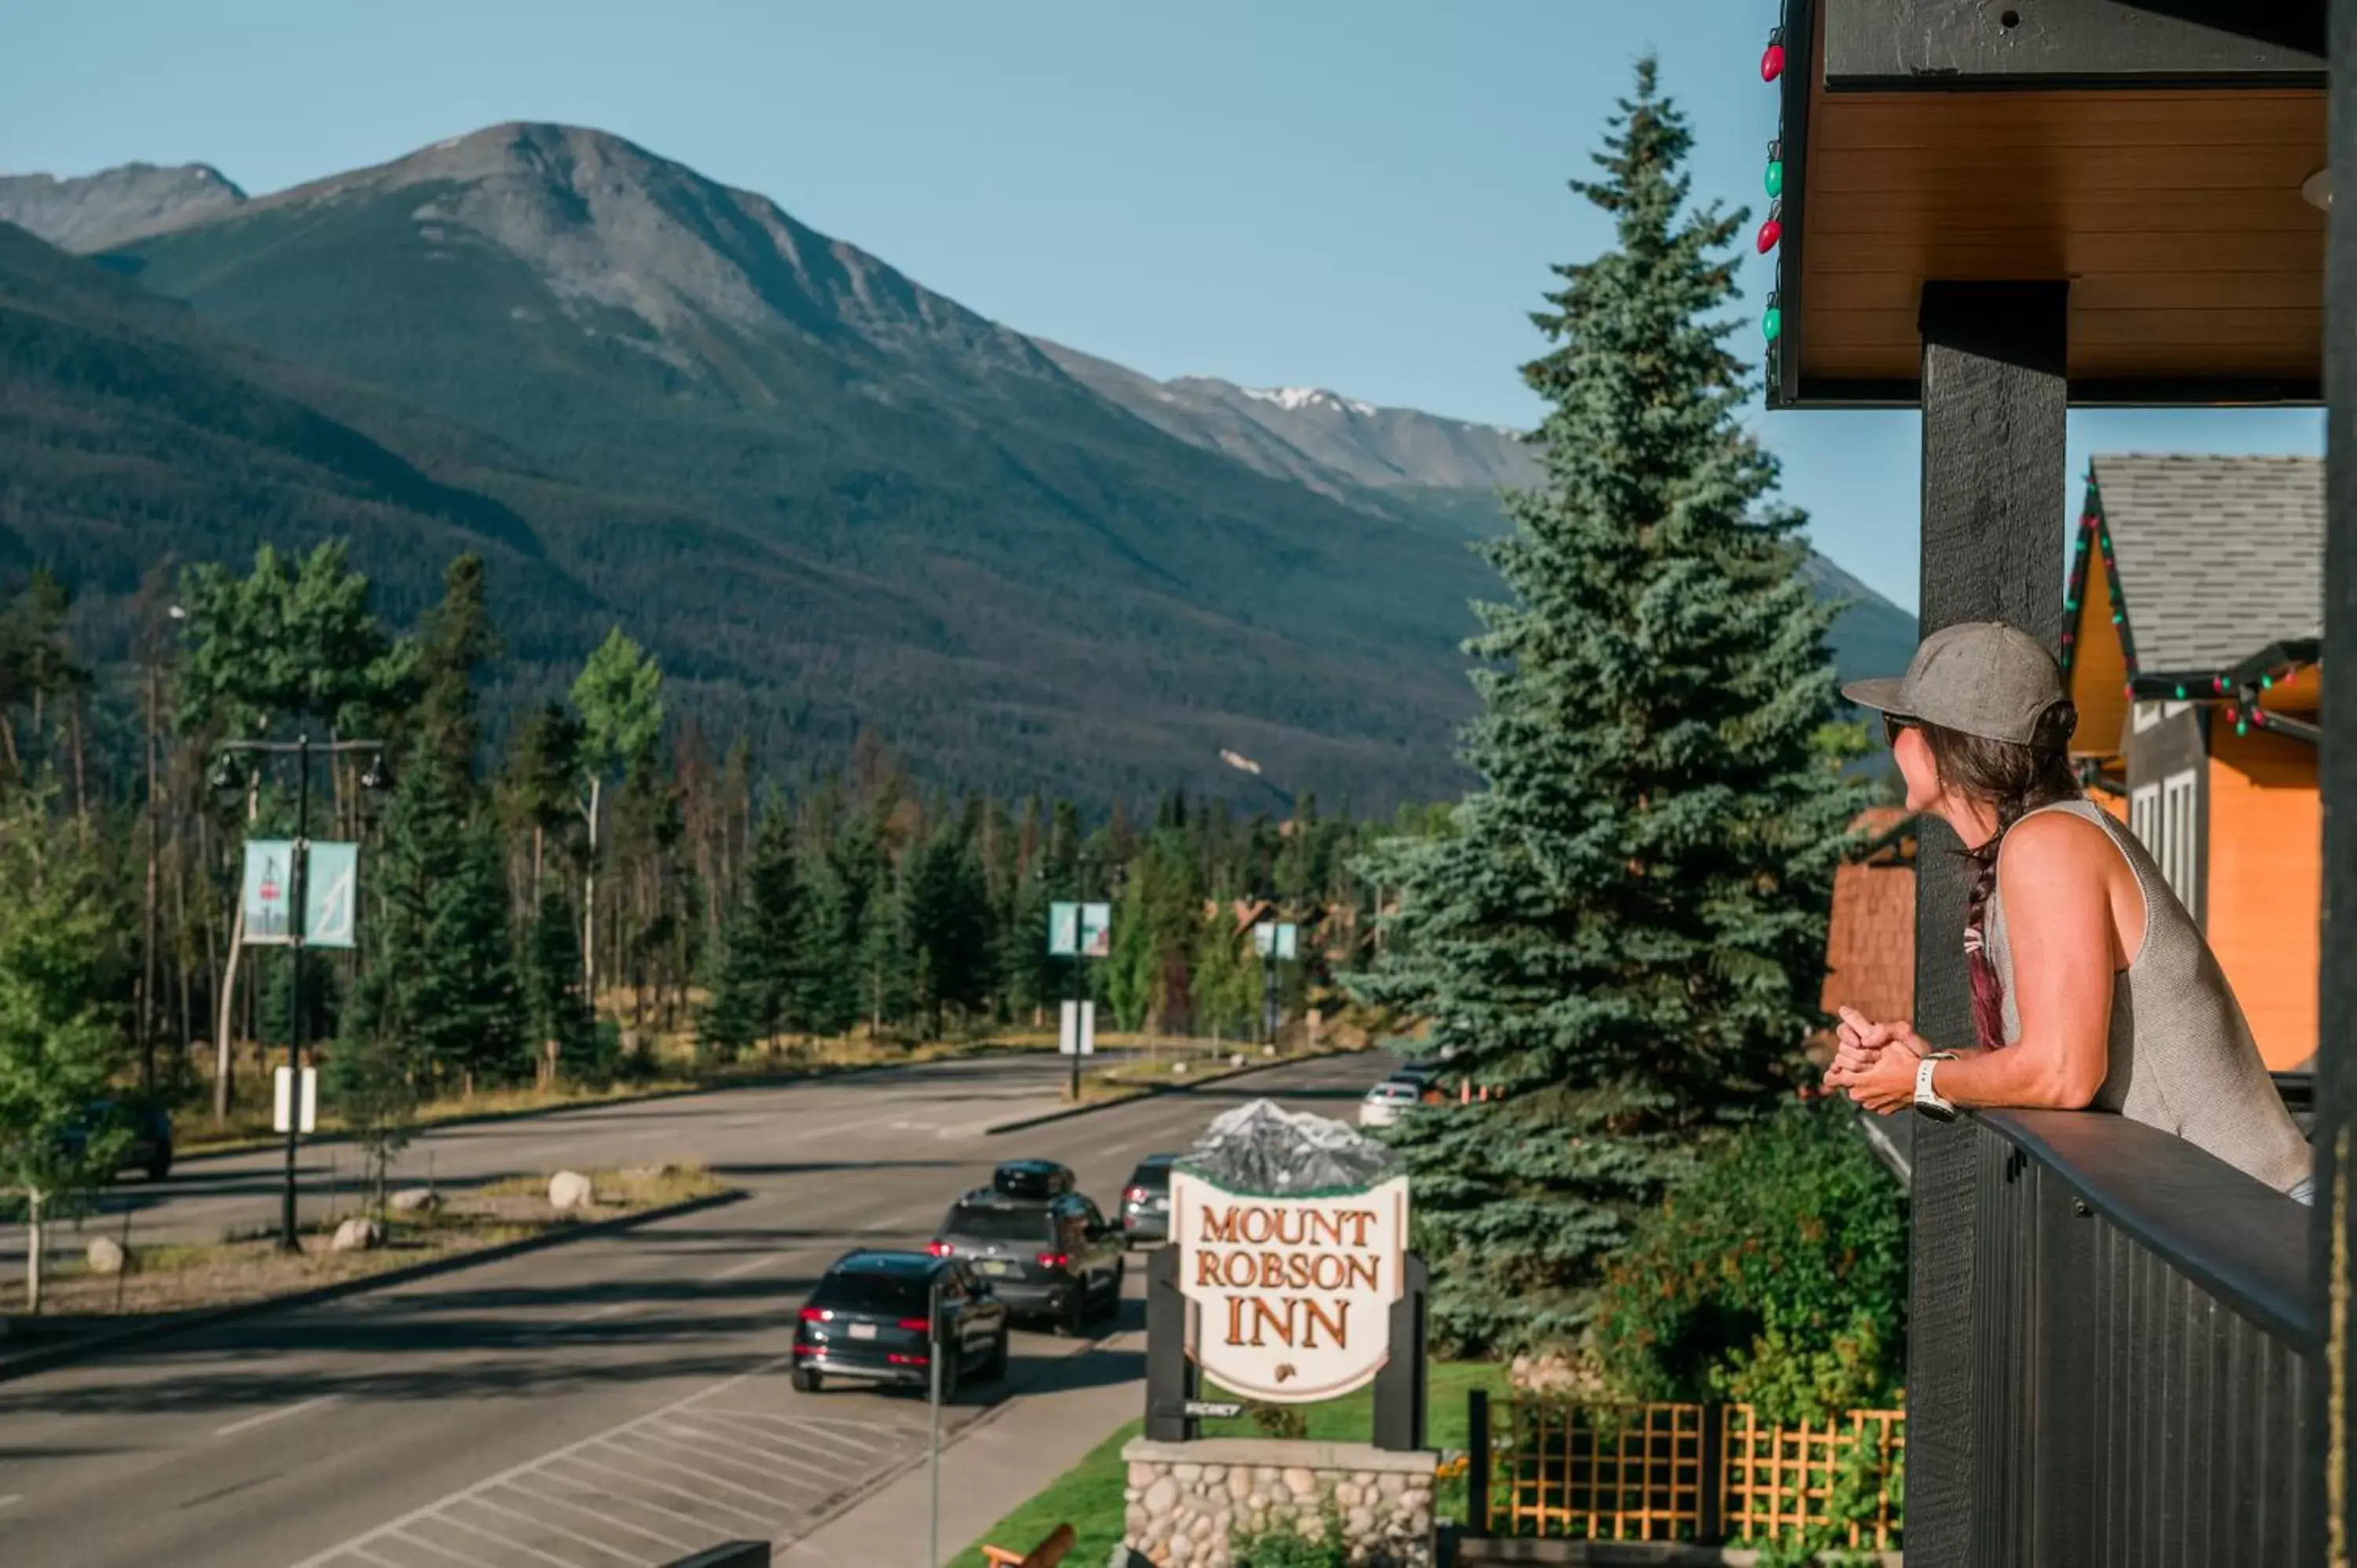 Property building in Mount Robson Inn